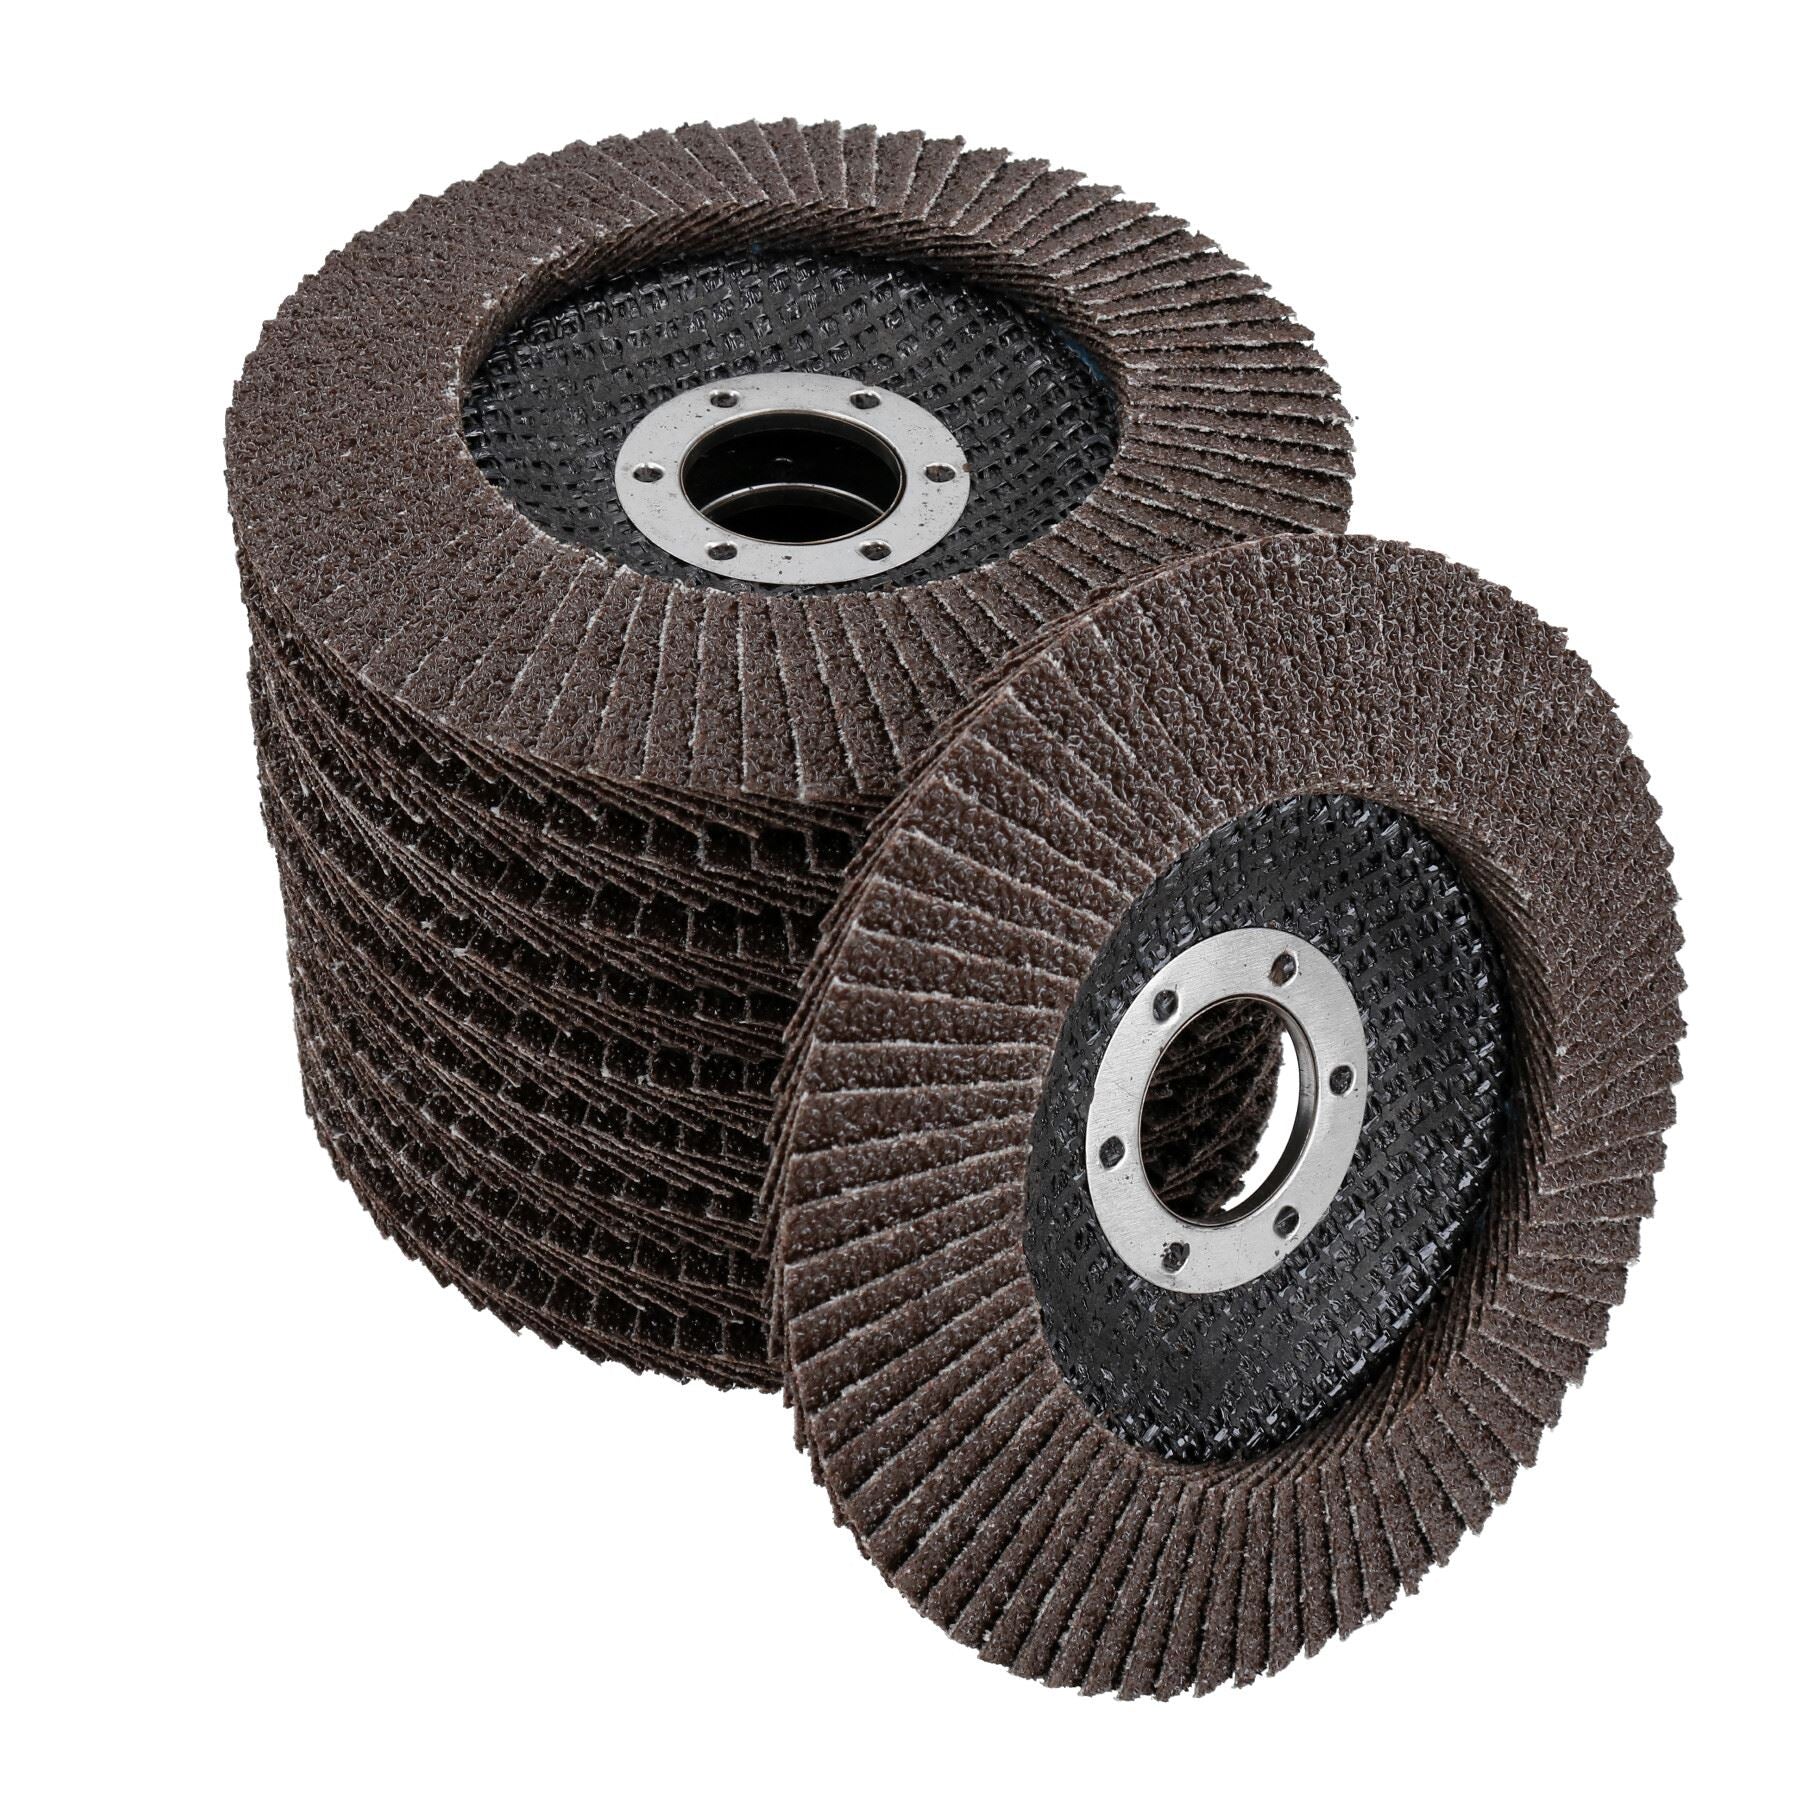 40 Grit Coarse Flap Disc Calcined Sanding Wheels for 4-1/2” Angle Grinders